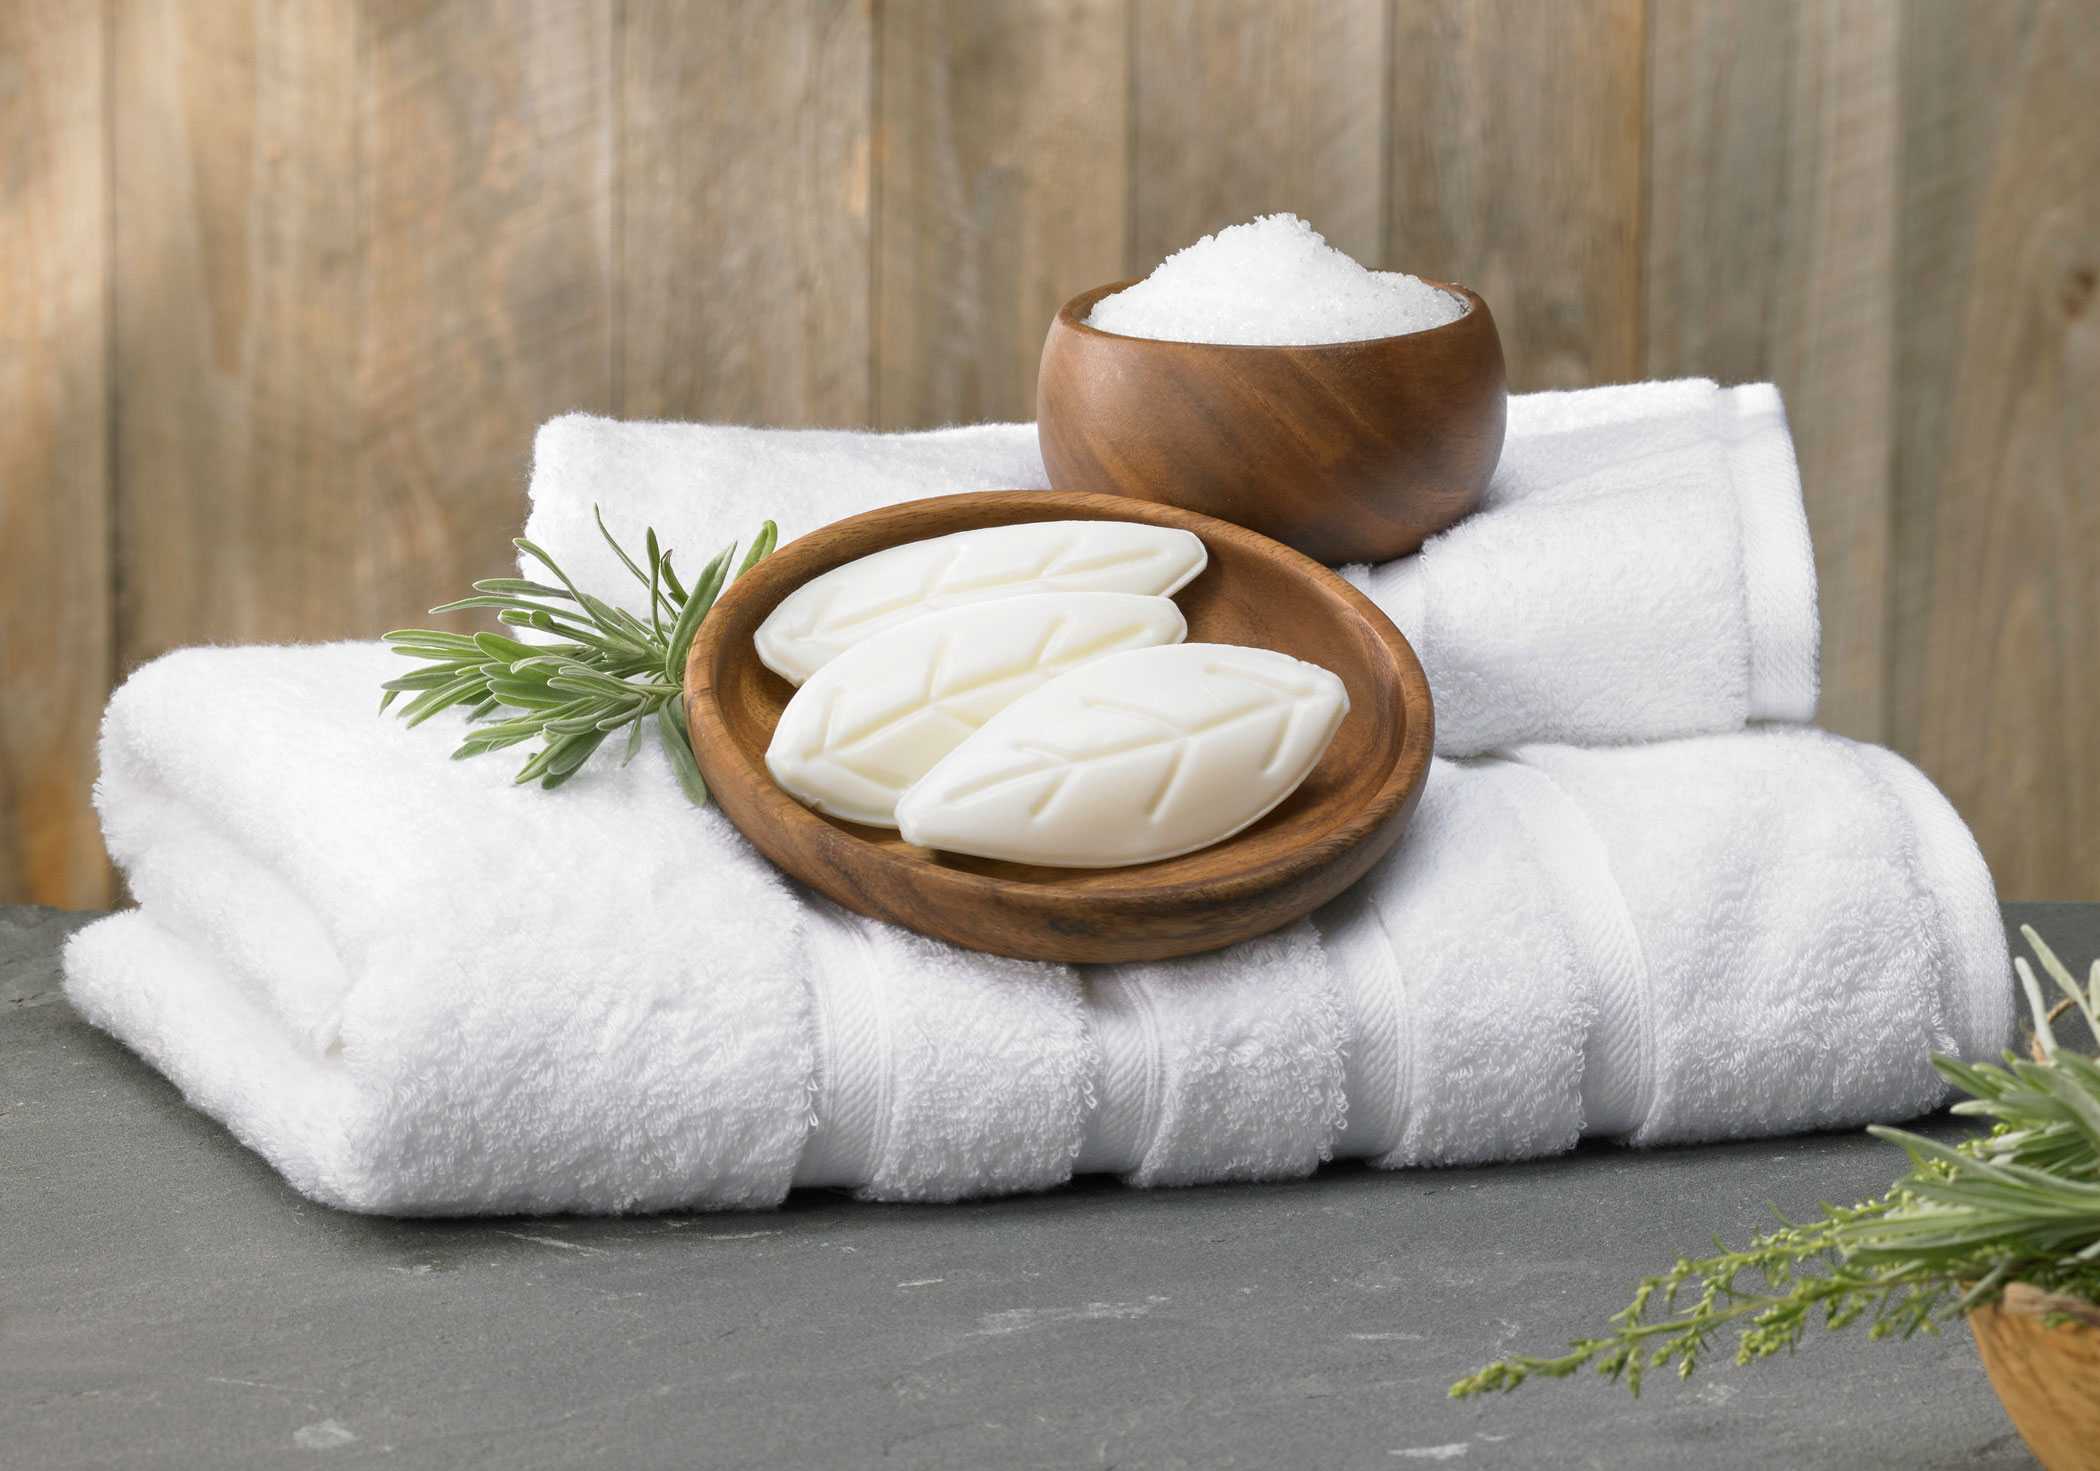 bars of soap held in wooden bowls on top of fresh towels